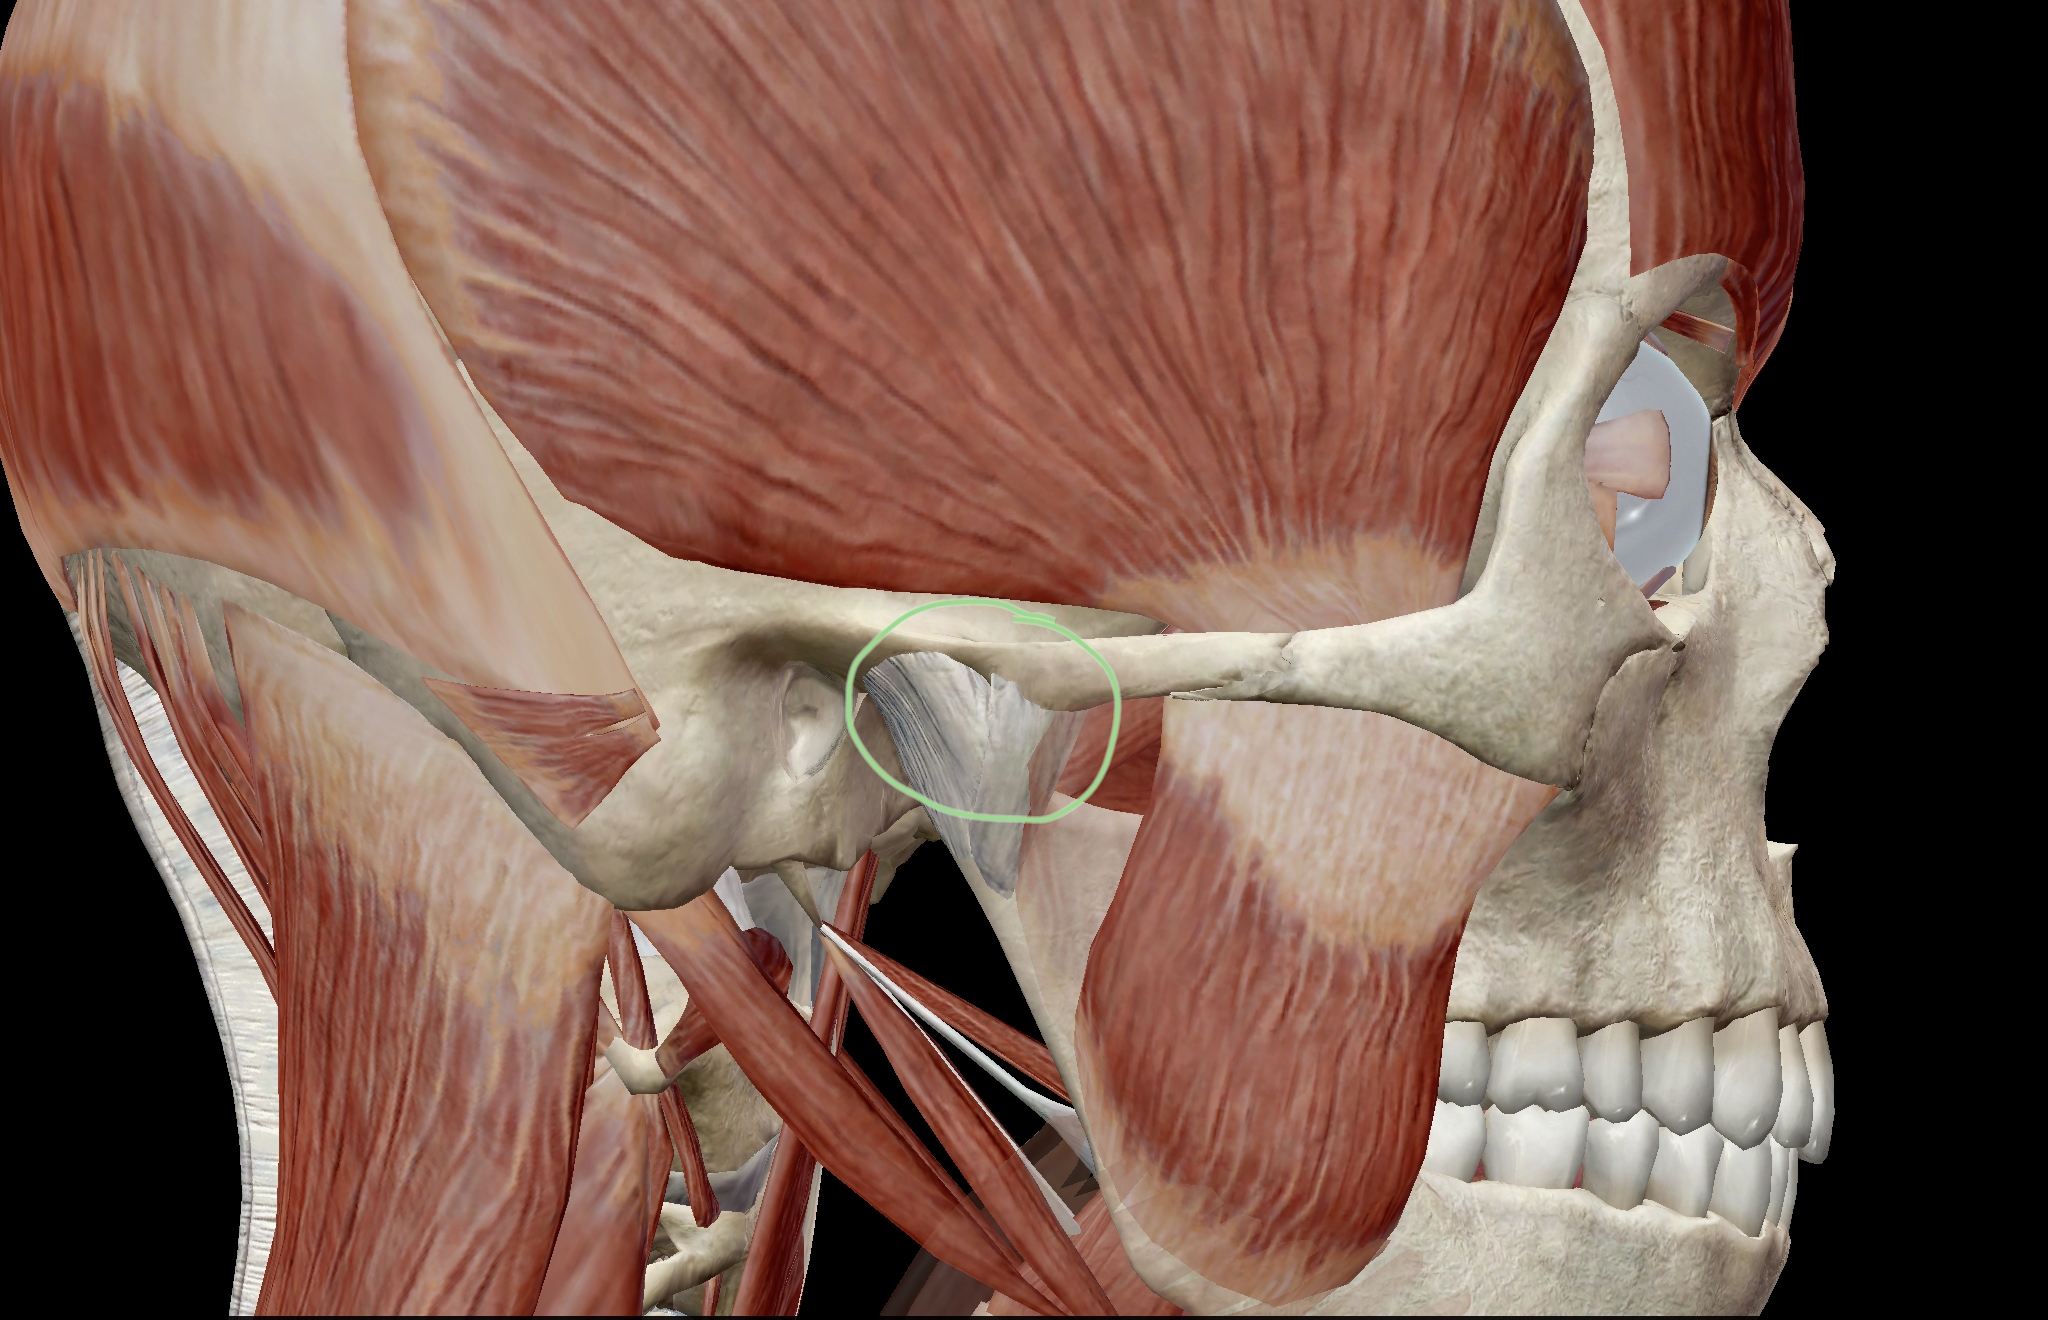 Chew on This: A Look at the Temporomandibular Joint and TMD